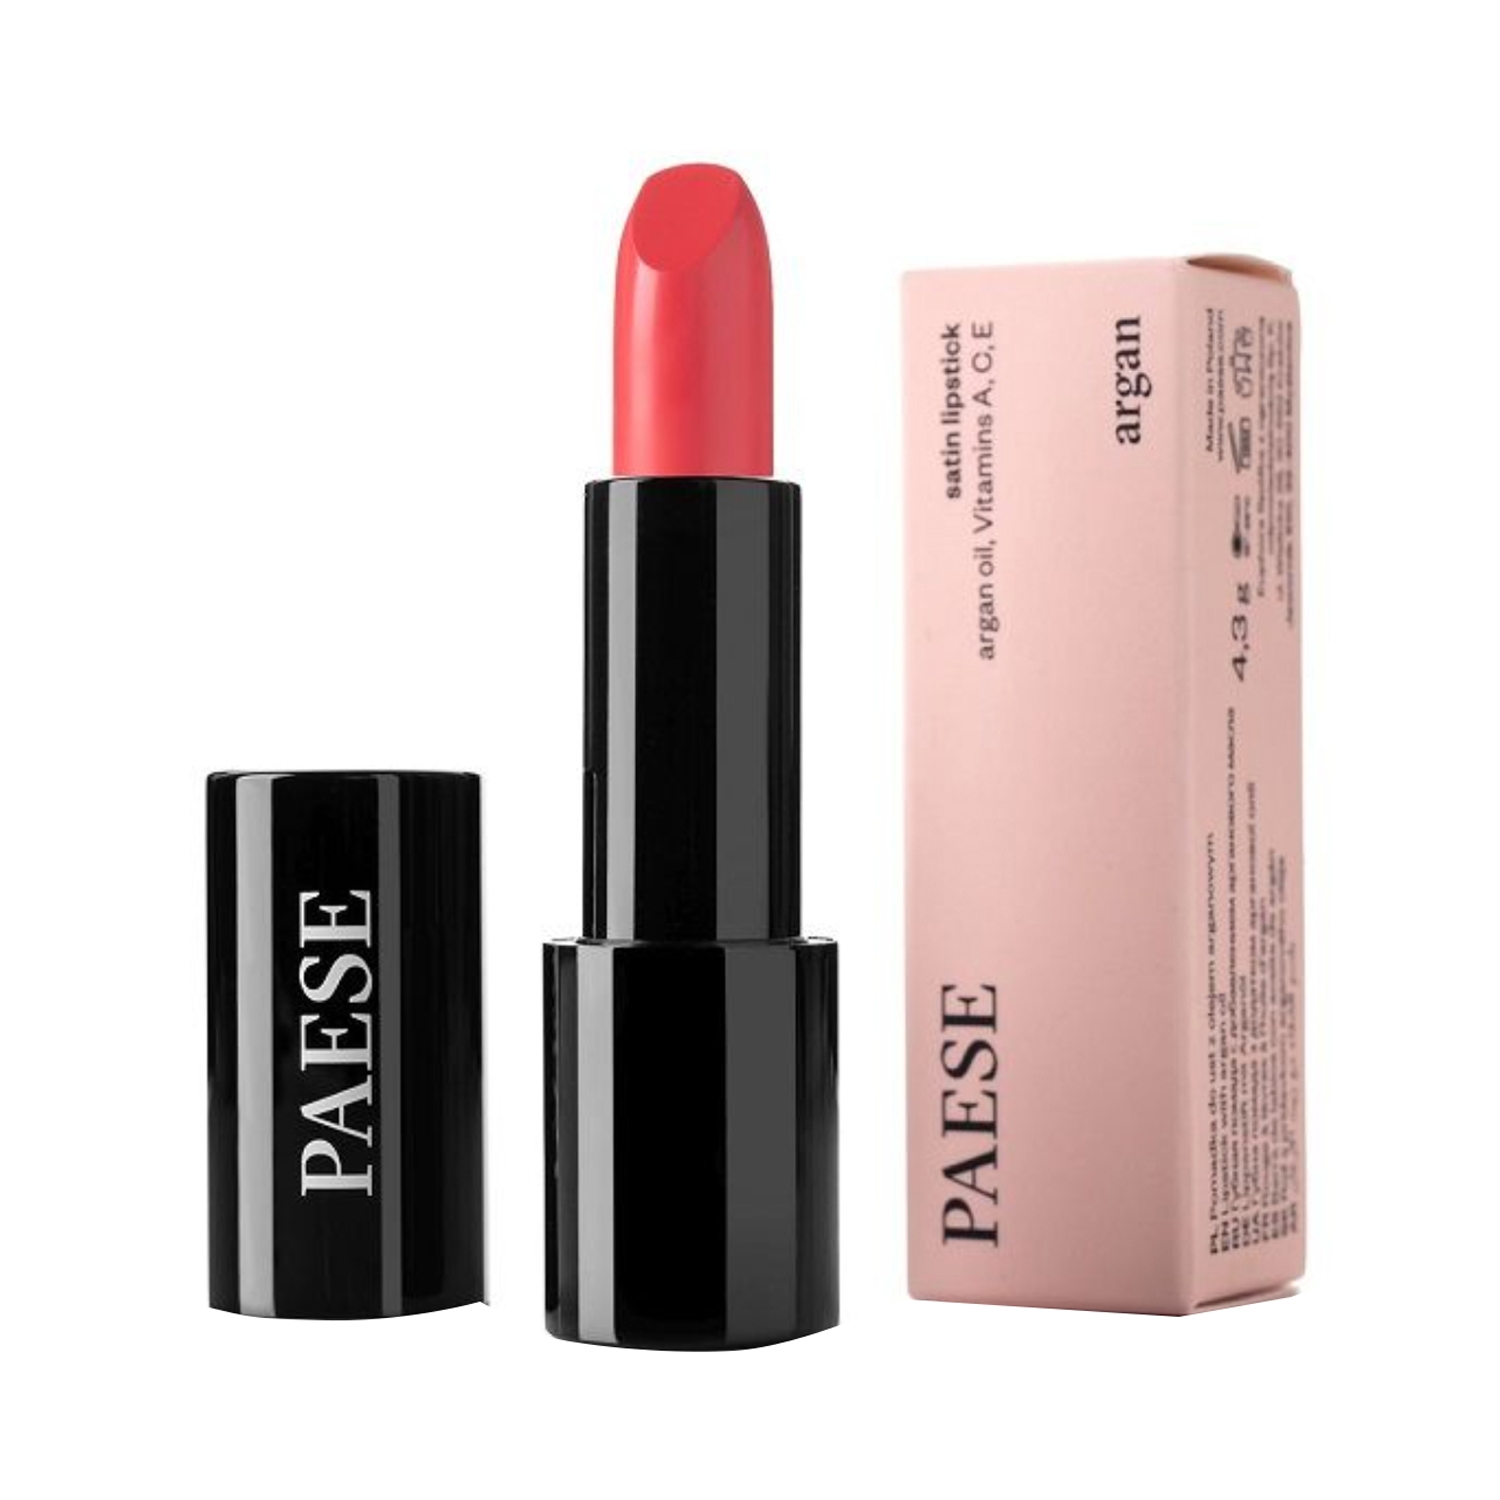 Paese Cosmetics Lipstick with Argan Oil - 72 Pink (4.3g)